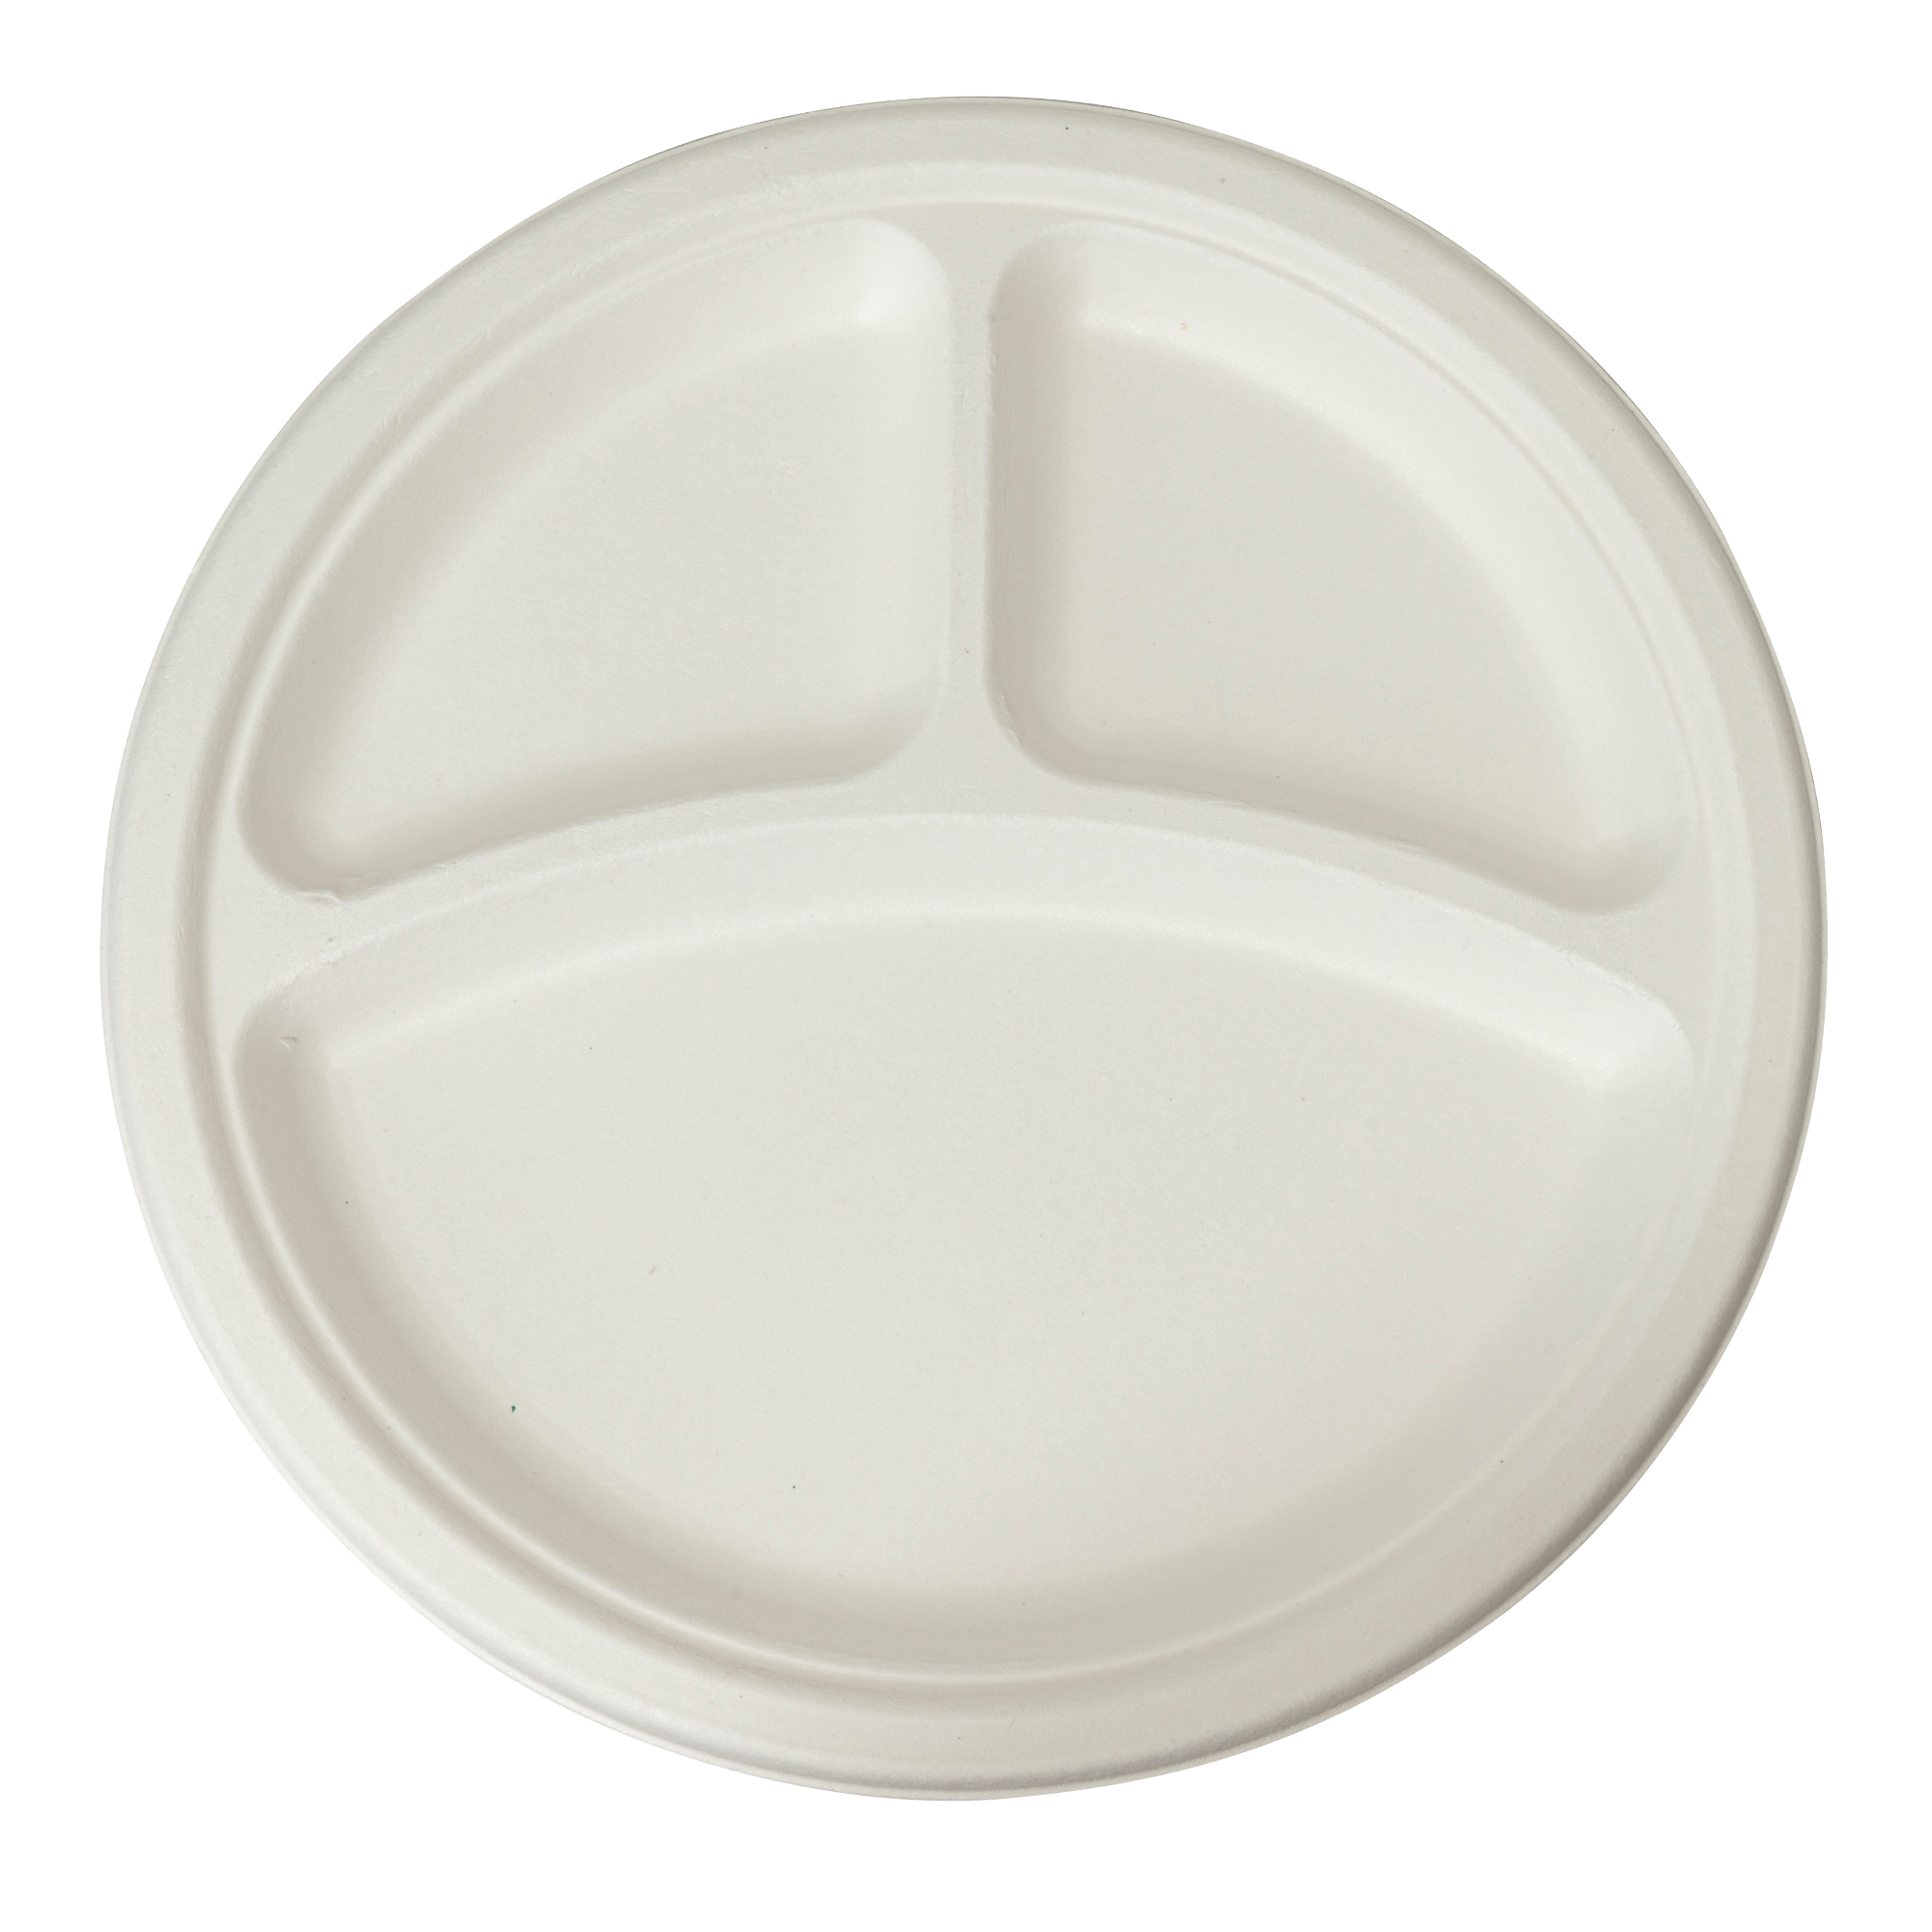 Round 3-Compartment Compostable Fiber Plate 9" 125pc/pack - White